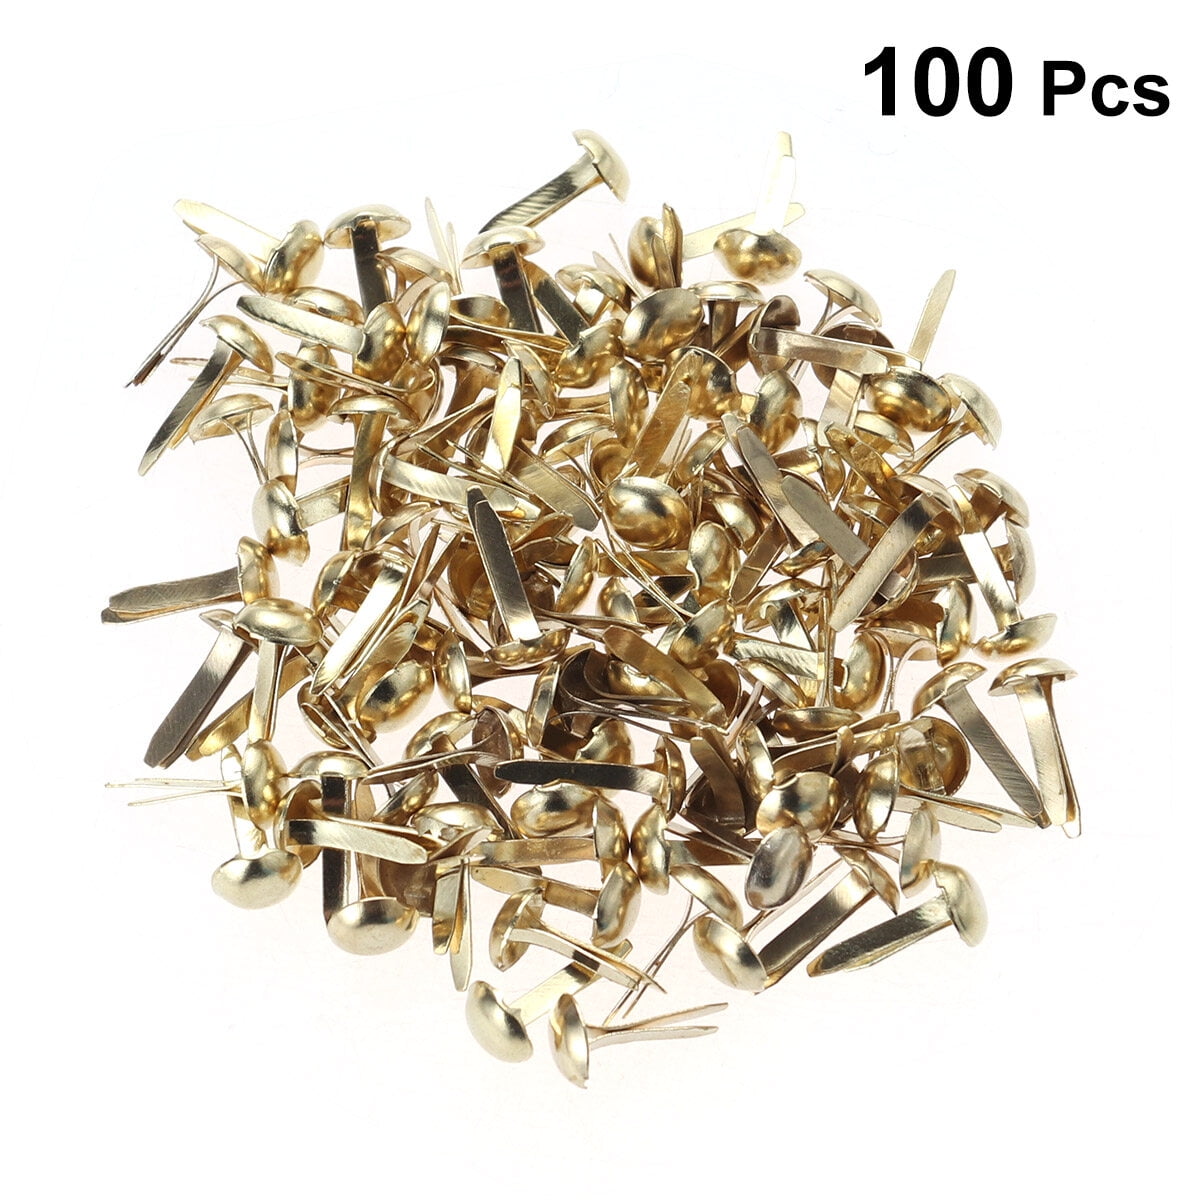 100pcs Approx. 1.7 X 0.8 Cm Multicolor Mini Metal Fasteners Scrapbooking  Brad Nails For Handmade Paper Crafts, Decorative Scrapbooking Crafts Diy  Projects